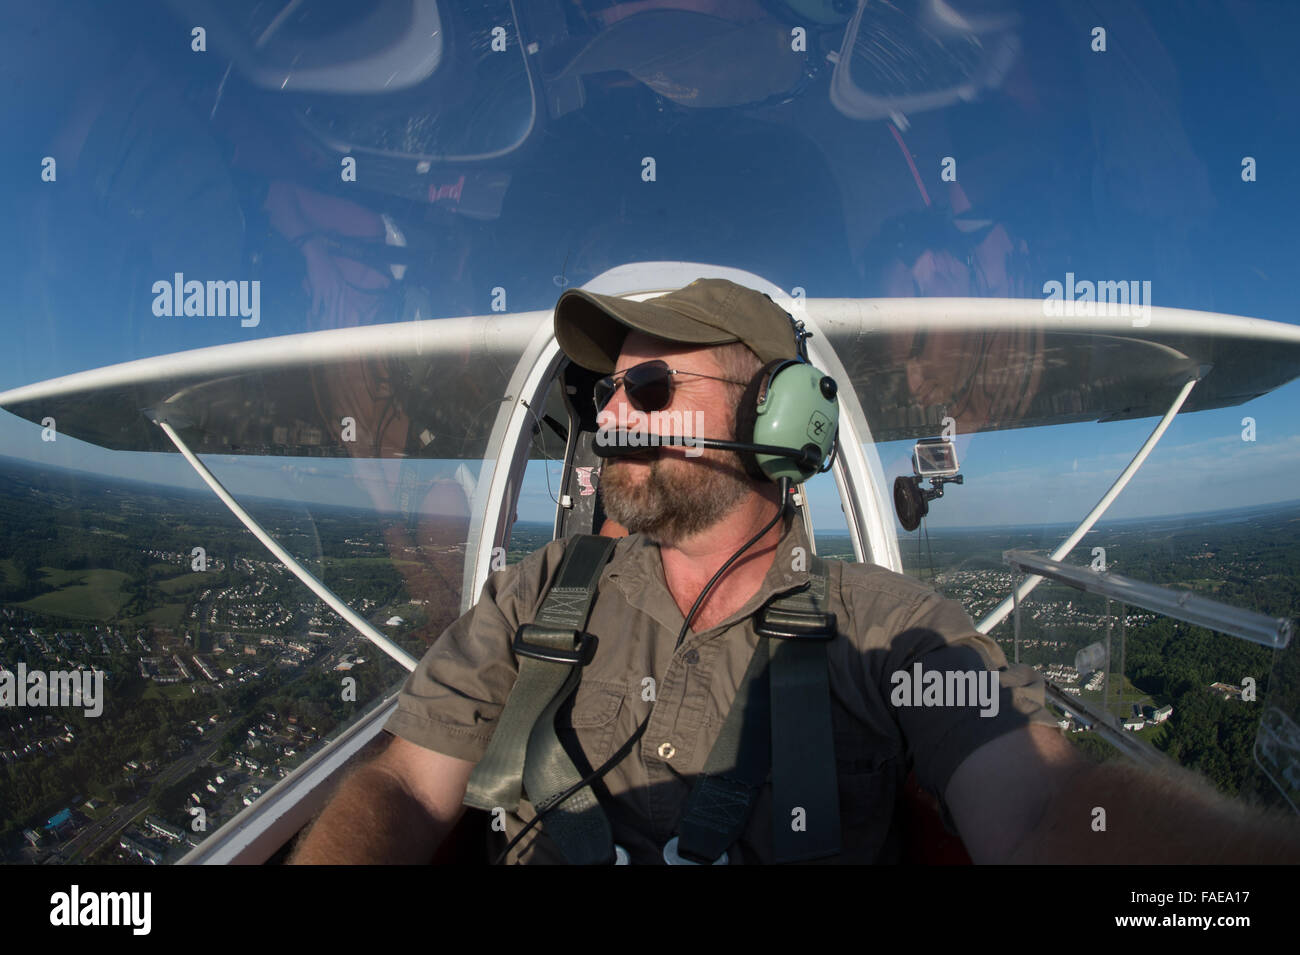 Pilot in the cockpit of an airplane. Stock Photo